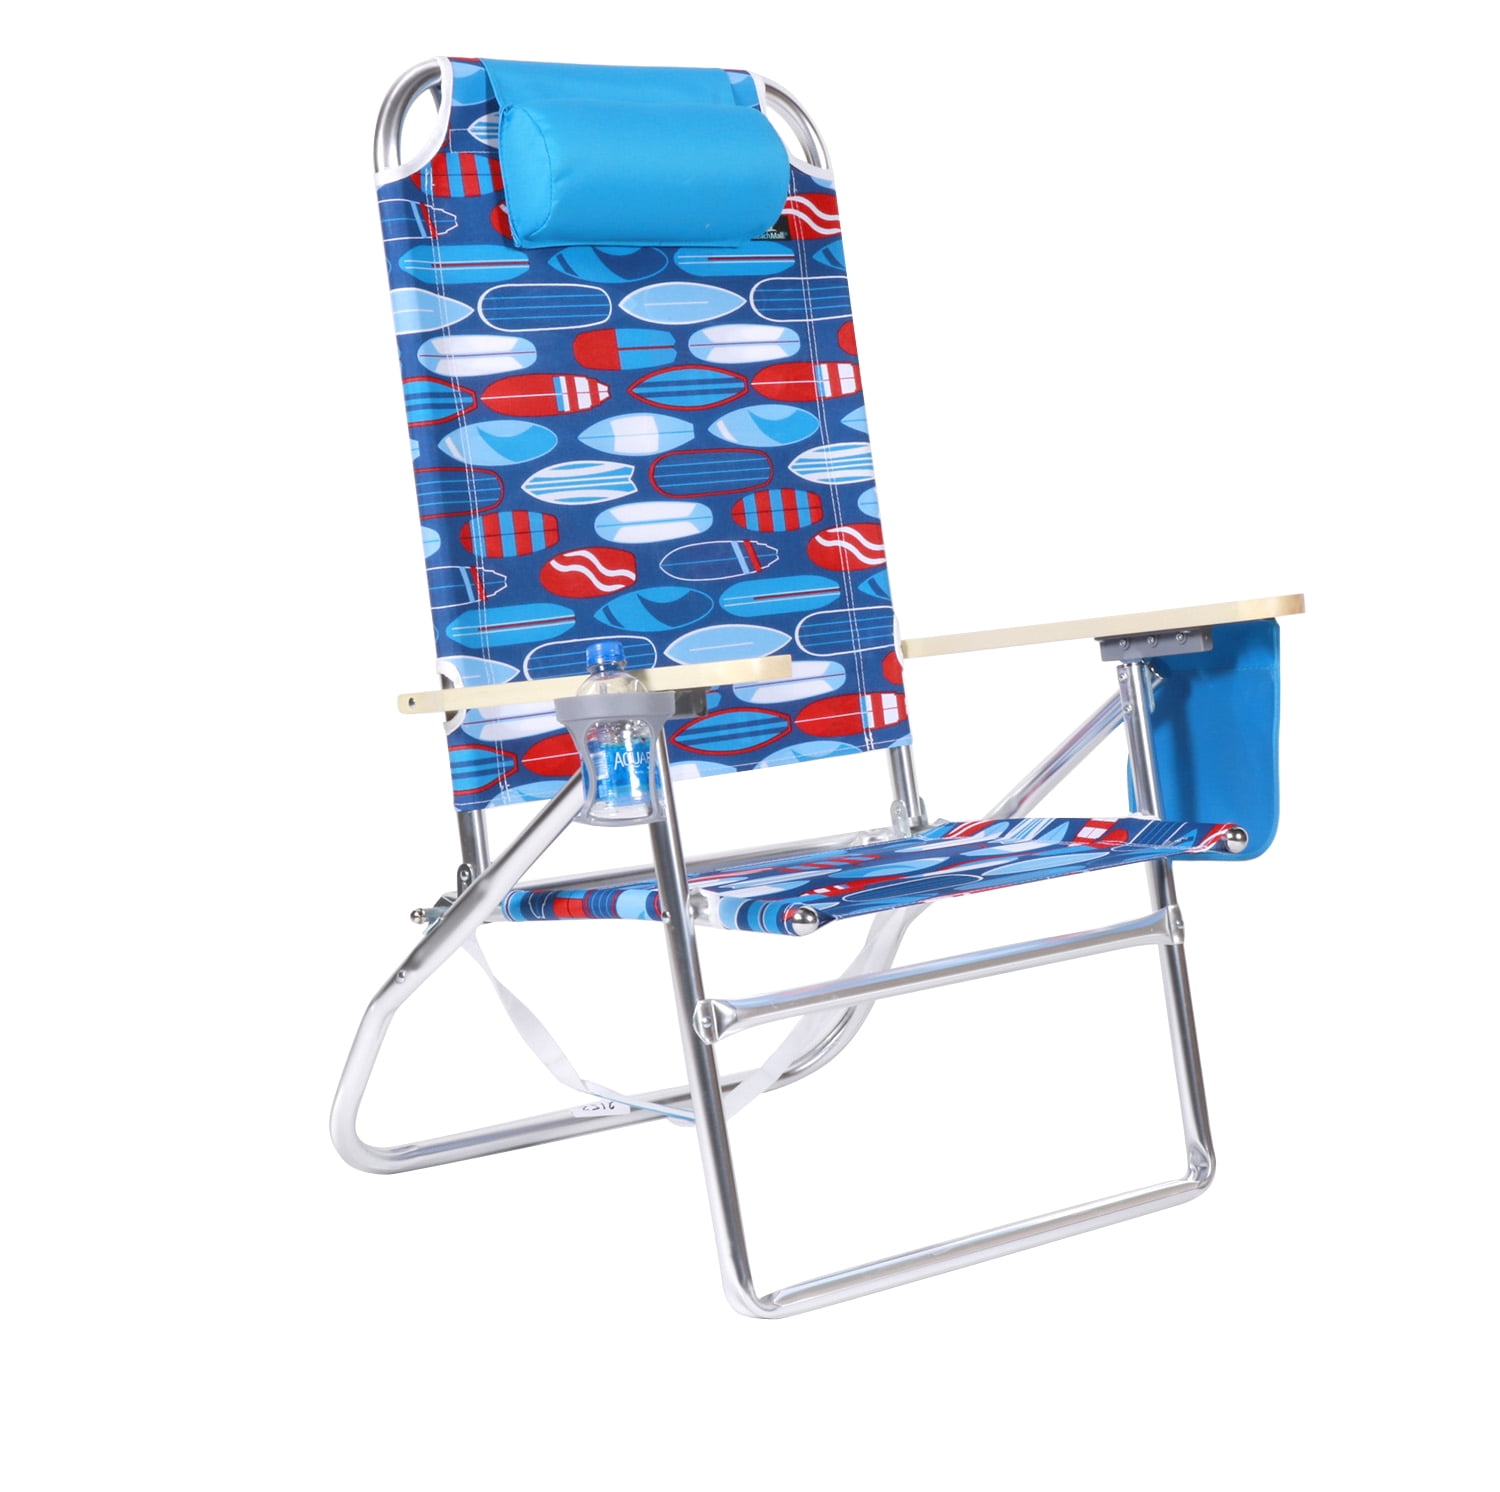 Creatice Extra Wide Seat Beach Chair for Small Space